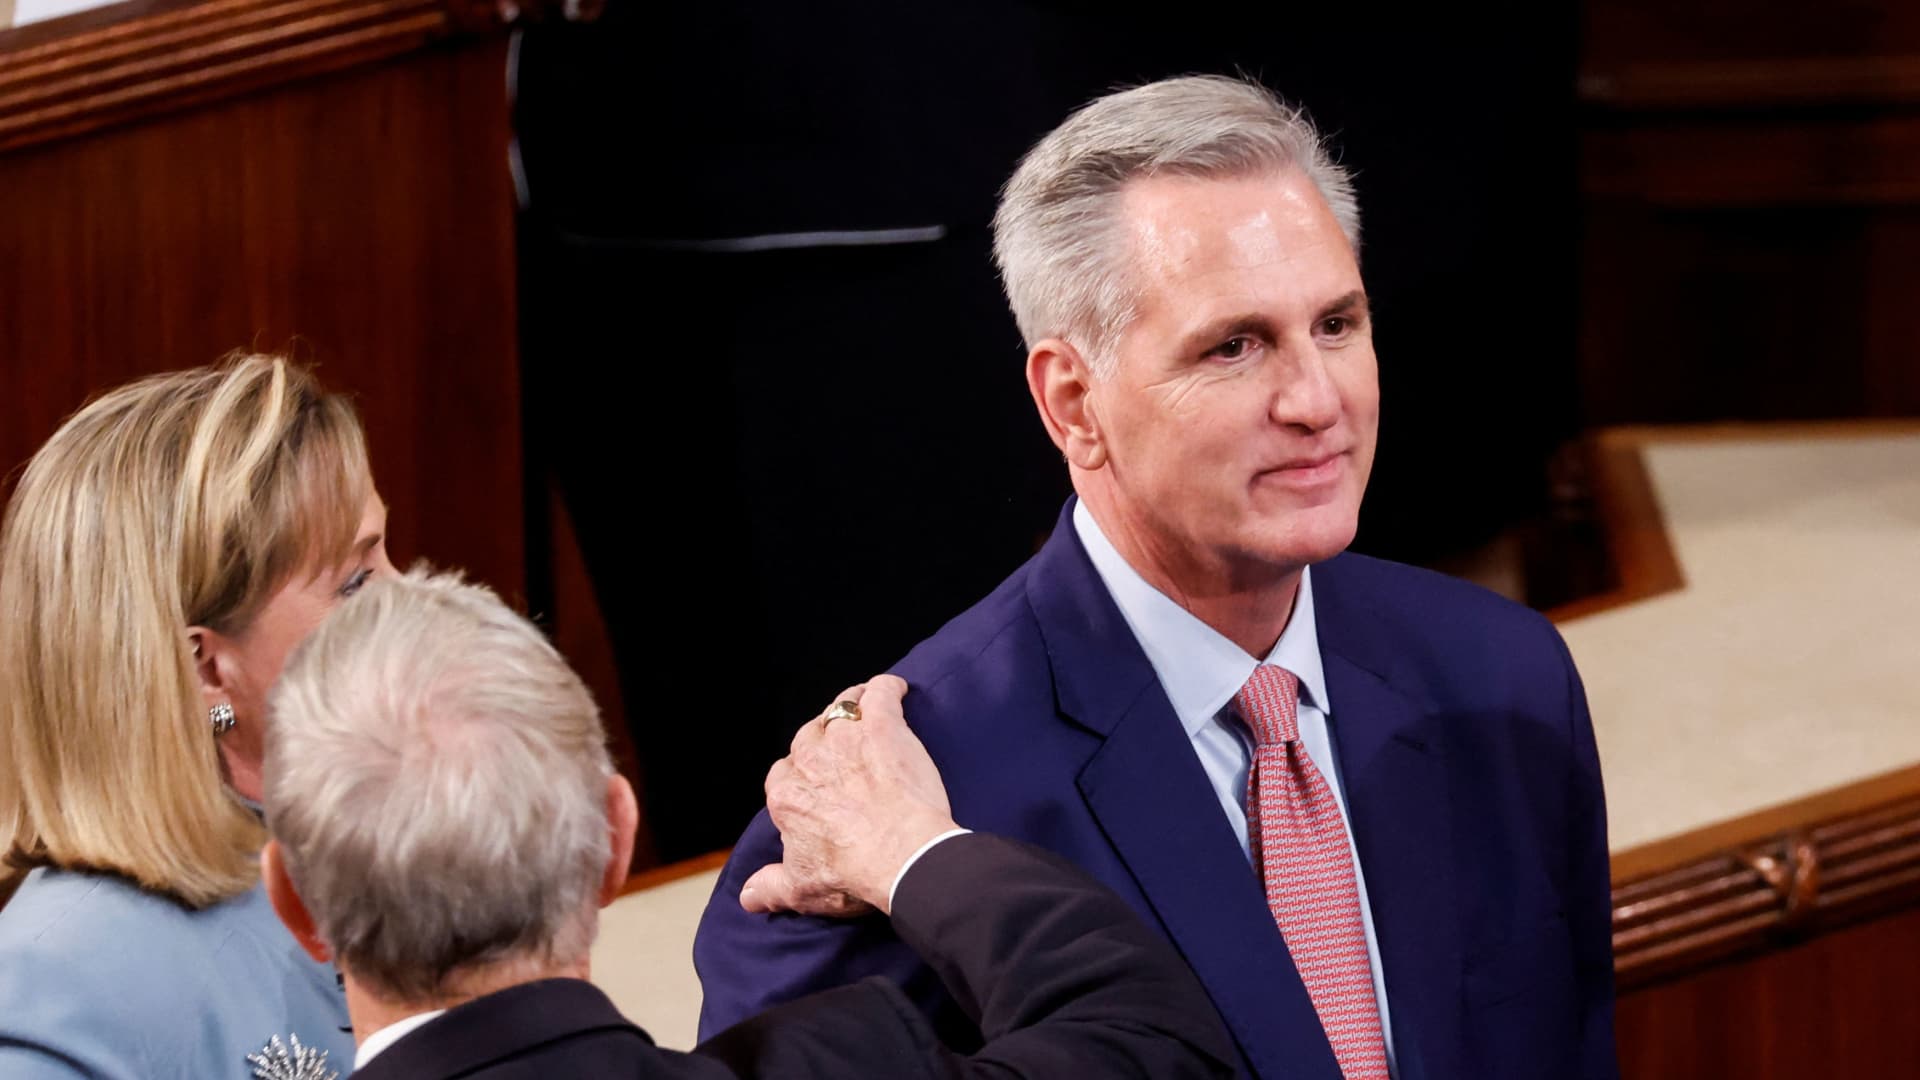 U.S. House Republican Leader Kevin McCarthy (R-CA) gets a pat on the back from one of his House colleagues prior to a fourth round of voting for a new House Speaker on the second day of the 118th Congress at the U.S. Capitol in Washington, U.S., January 4, 2023. 